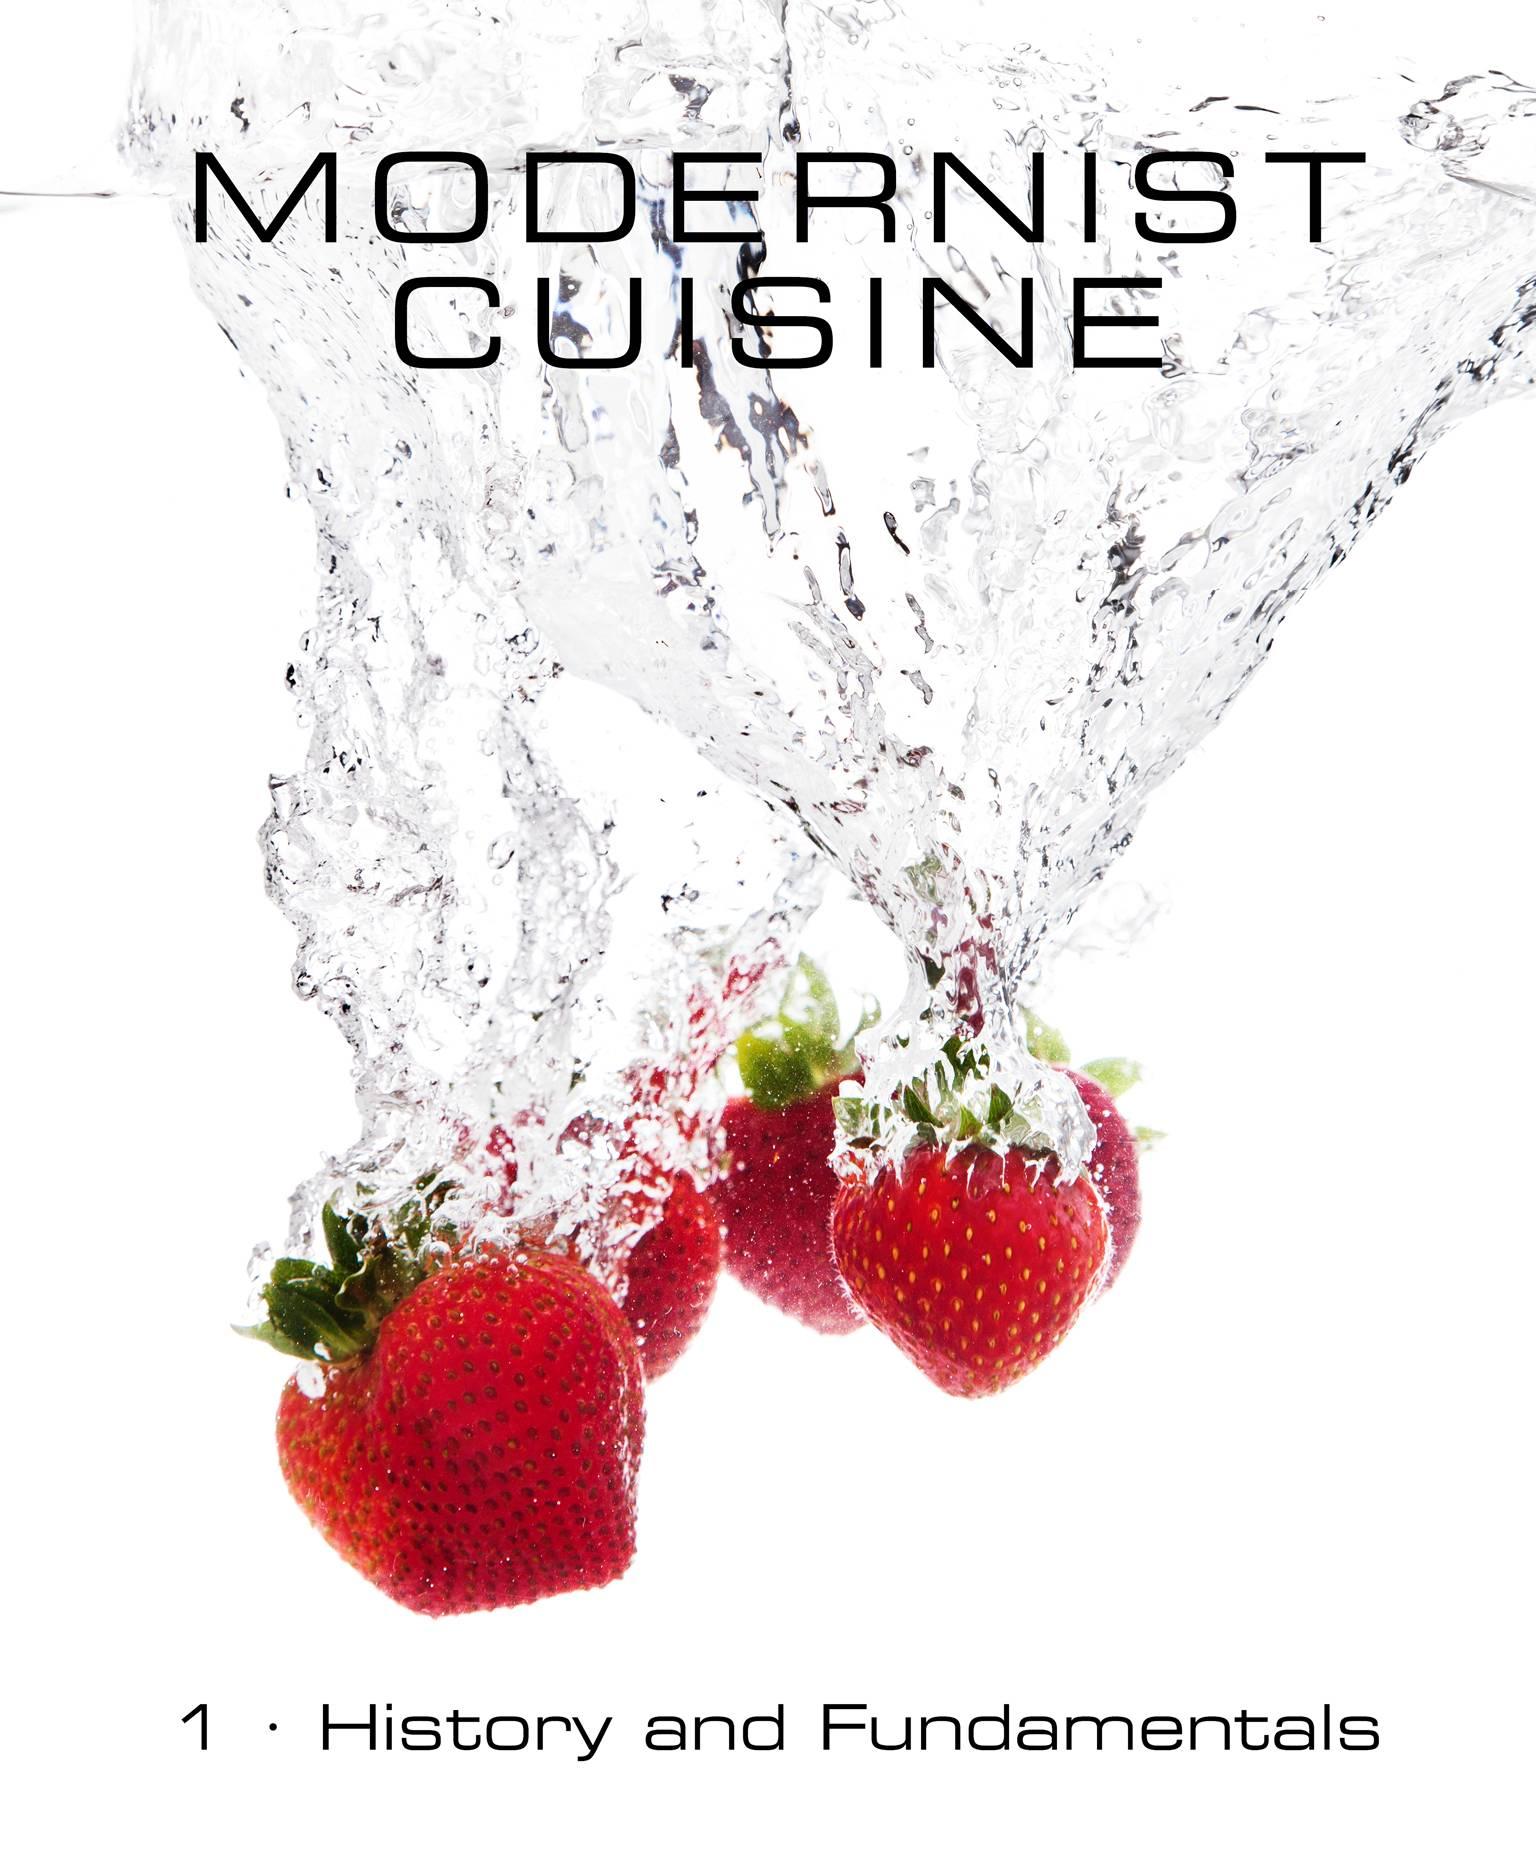 Modernist Cuisine is an interdisciplinary team in Bellevue, Washington, founded and led by Nathan Myhrvold. The group includes scientists, research and development chefs and a full editorial team—all dedicated to advancing the state of culinary art